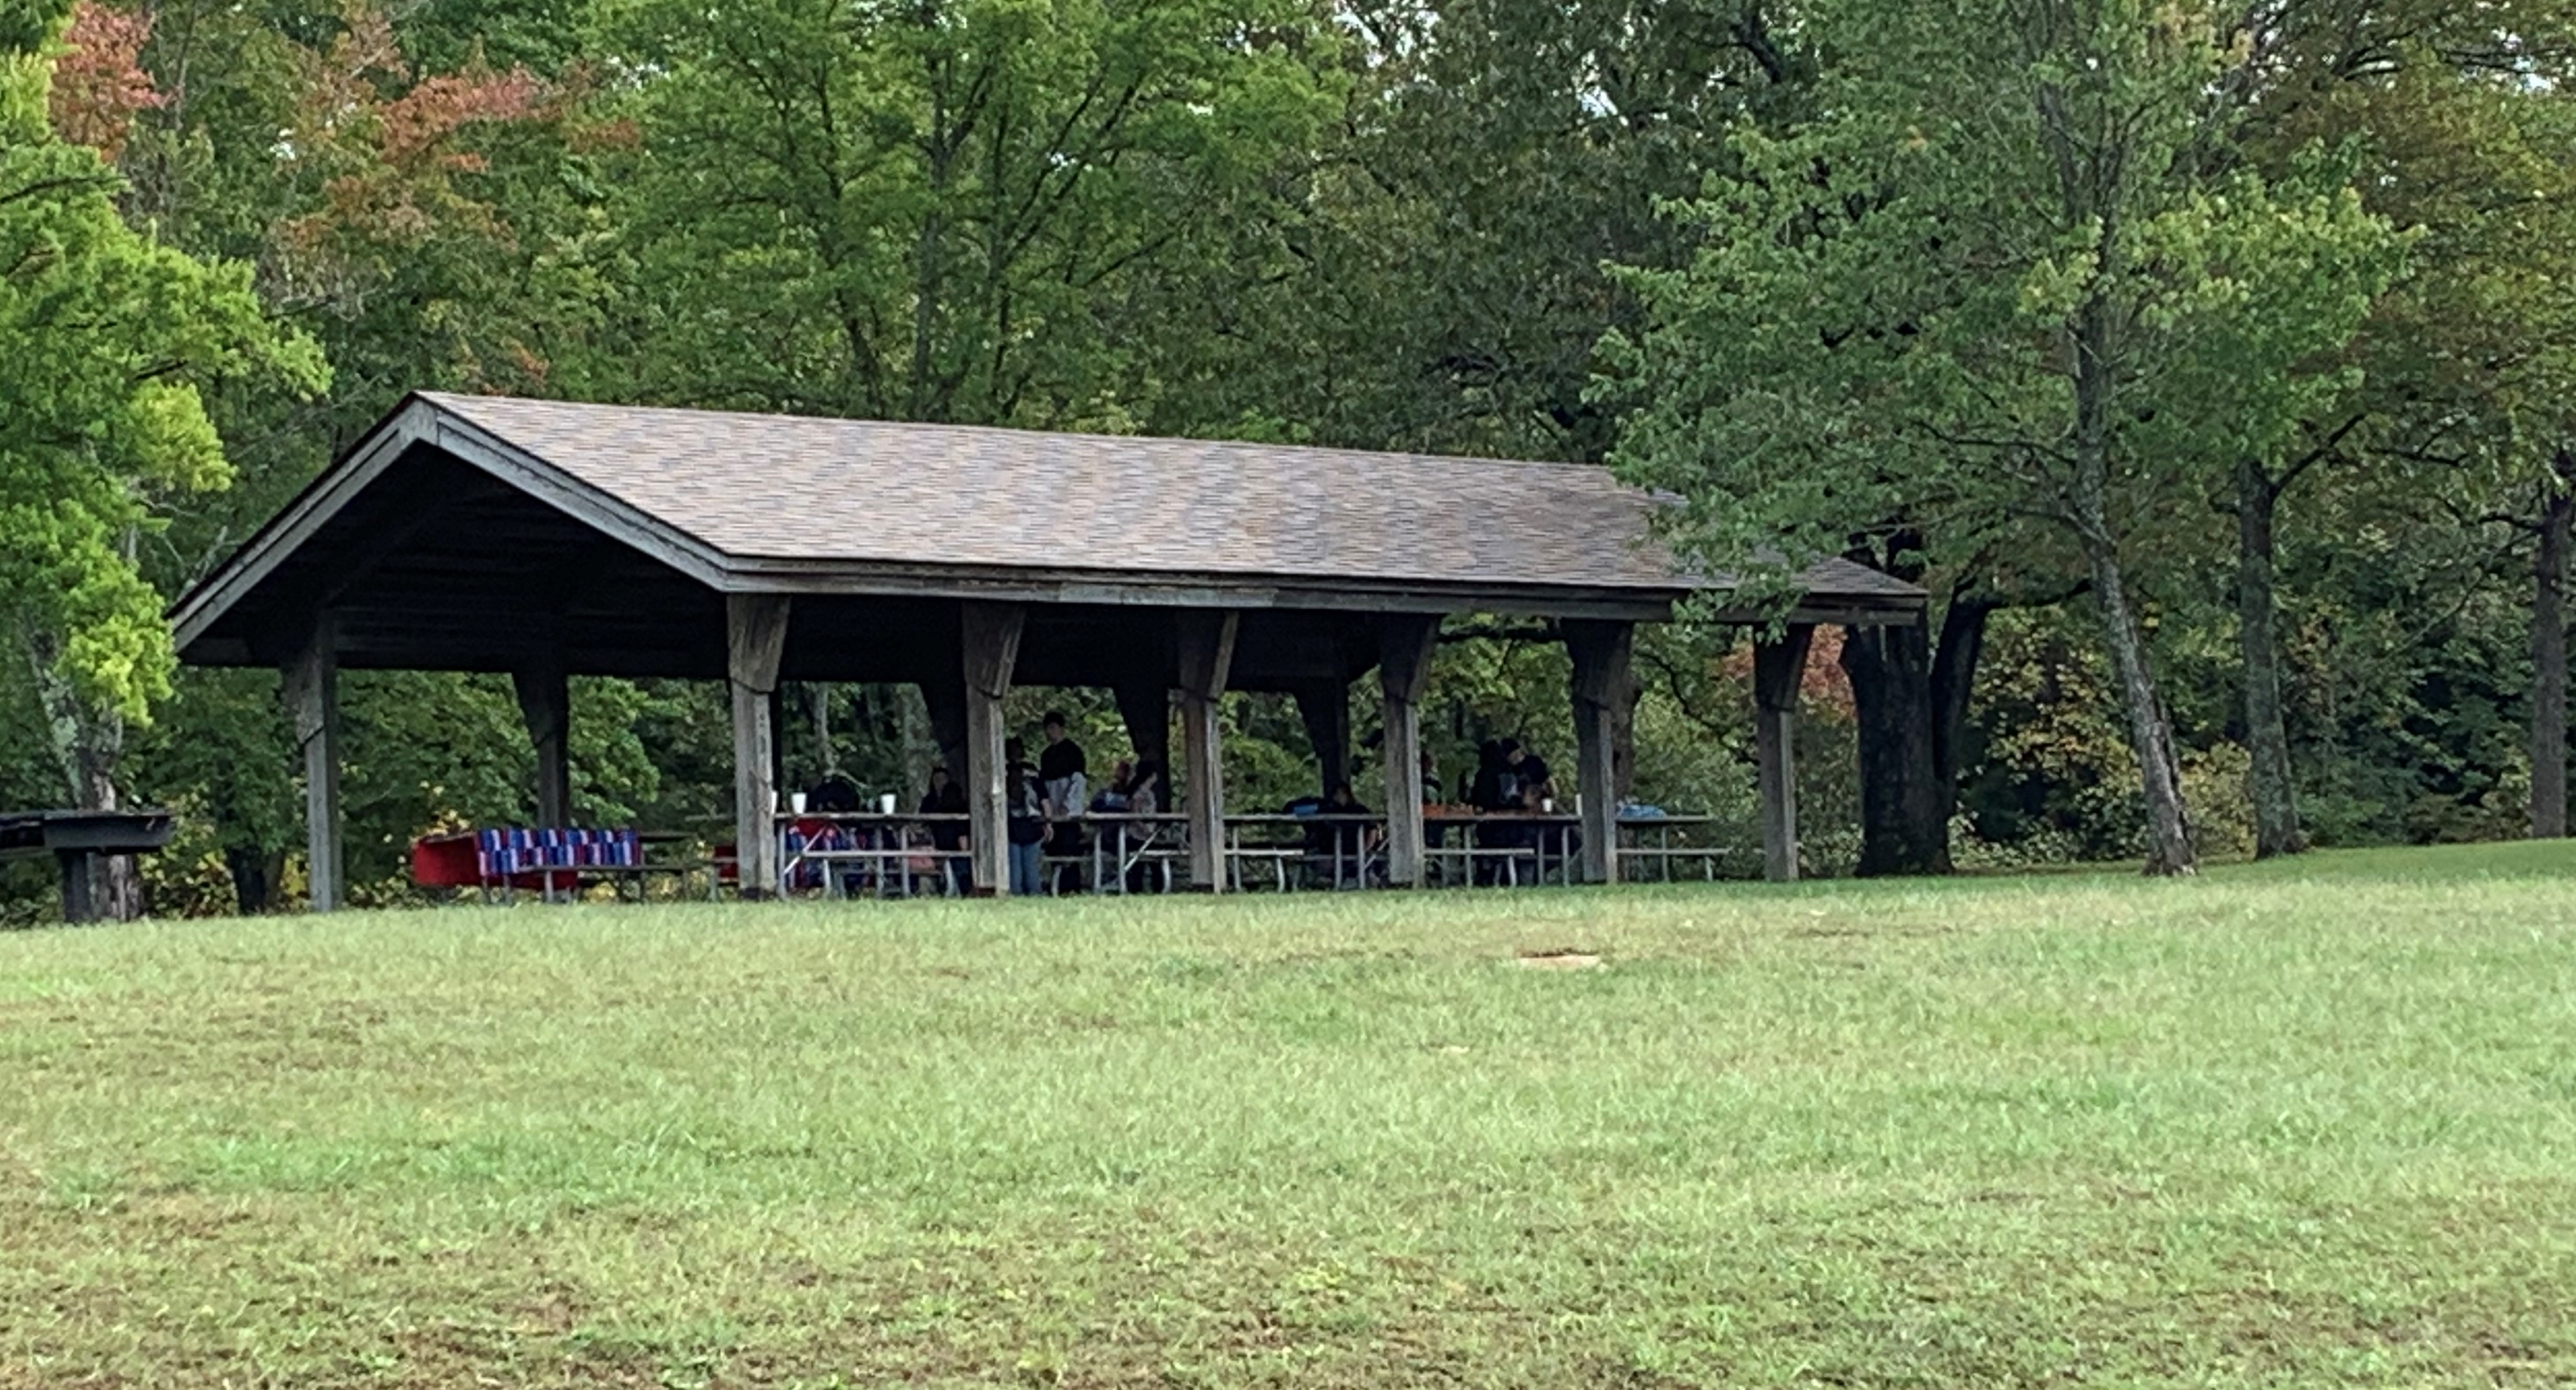 Park visitors have a picnic at the open shelter